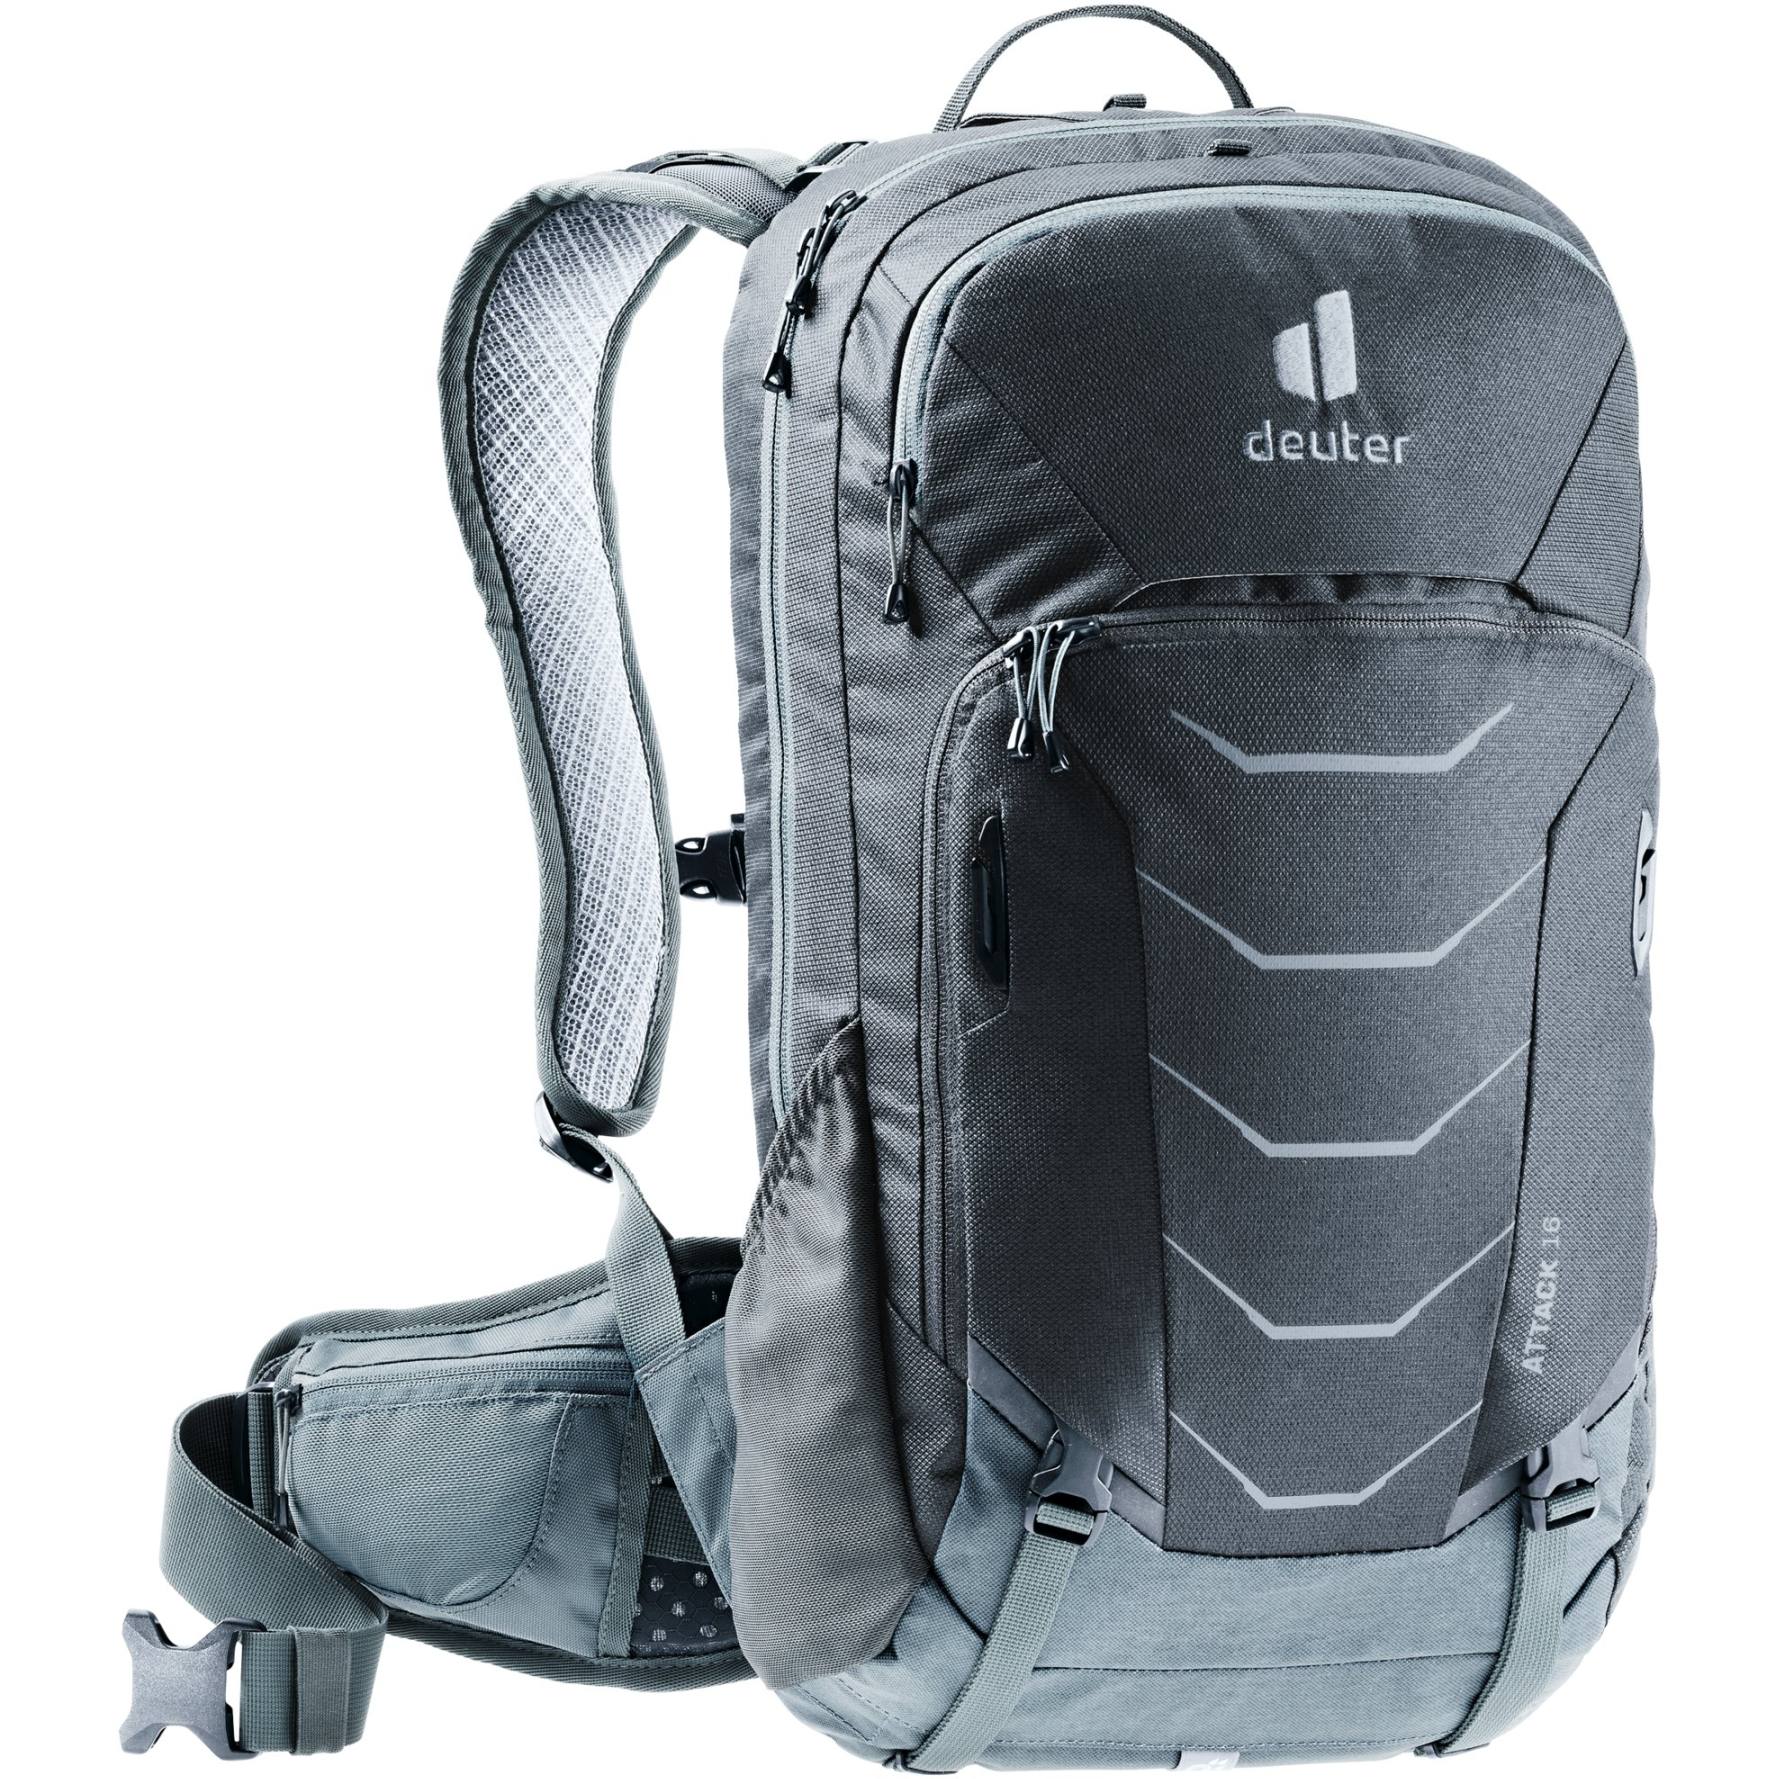 Image of Deuter Attack 16 Protector Backpack - graphite-shale